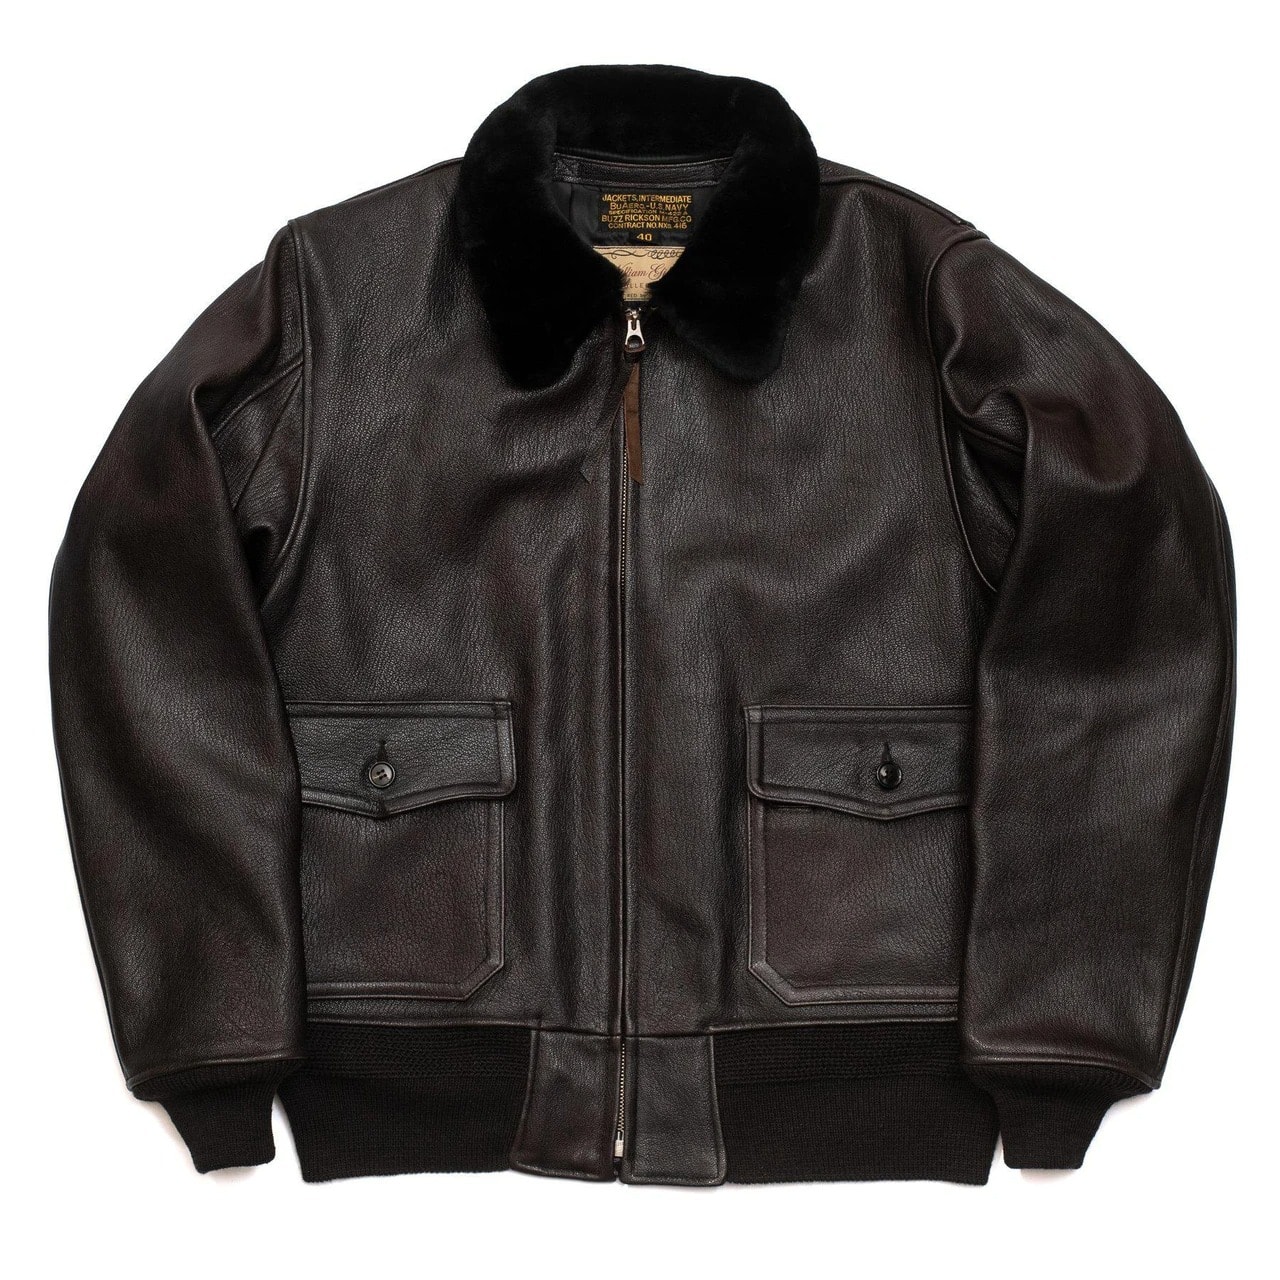 William Gibson x Buzz Rickson's FW20 Collaboration collection M-422A Leather Jacket m65 liner n-3b slender no stencil back m-51 clutch cafe outerwear fall winter 2020 drop release date